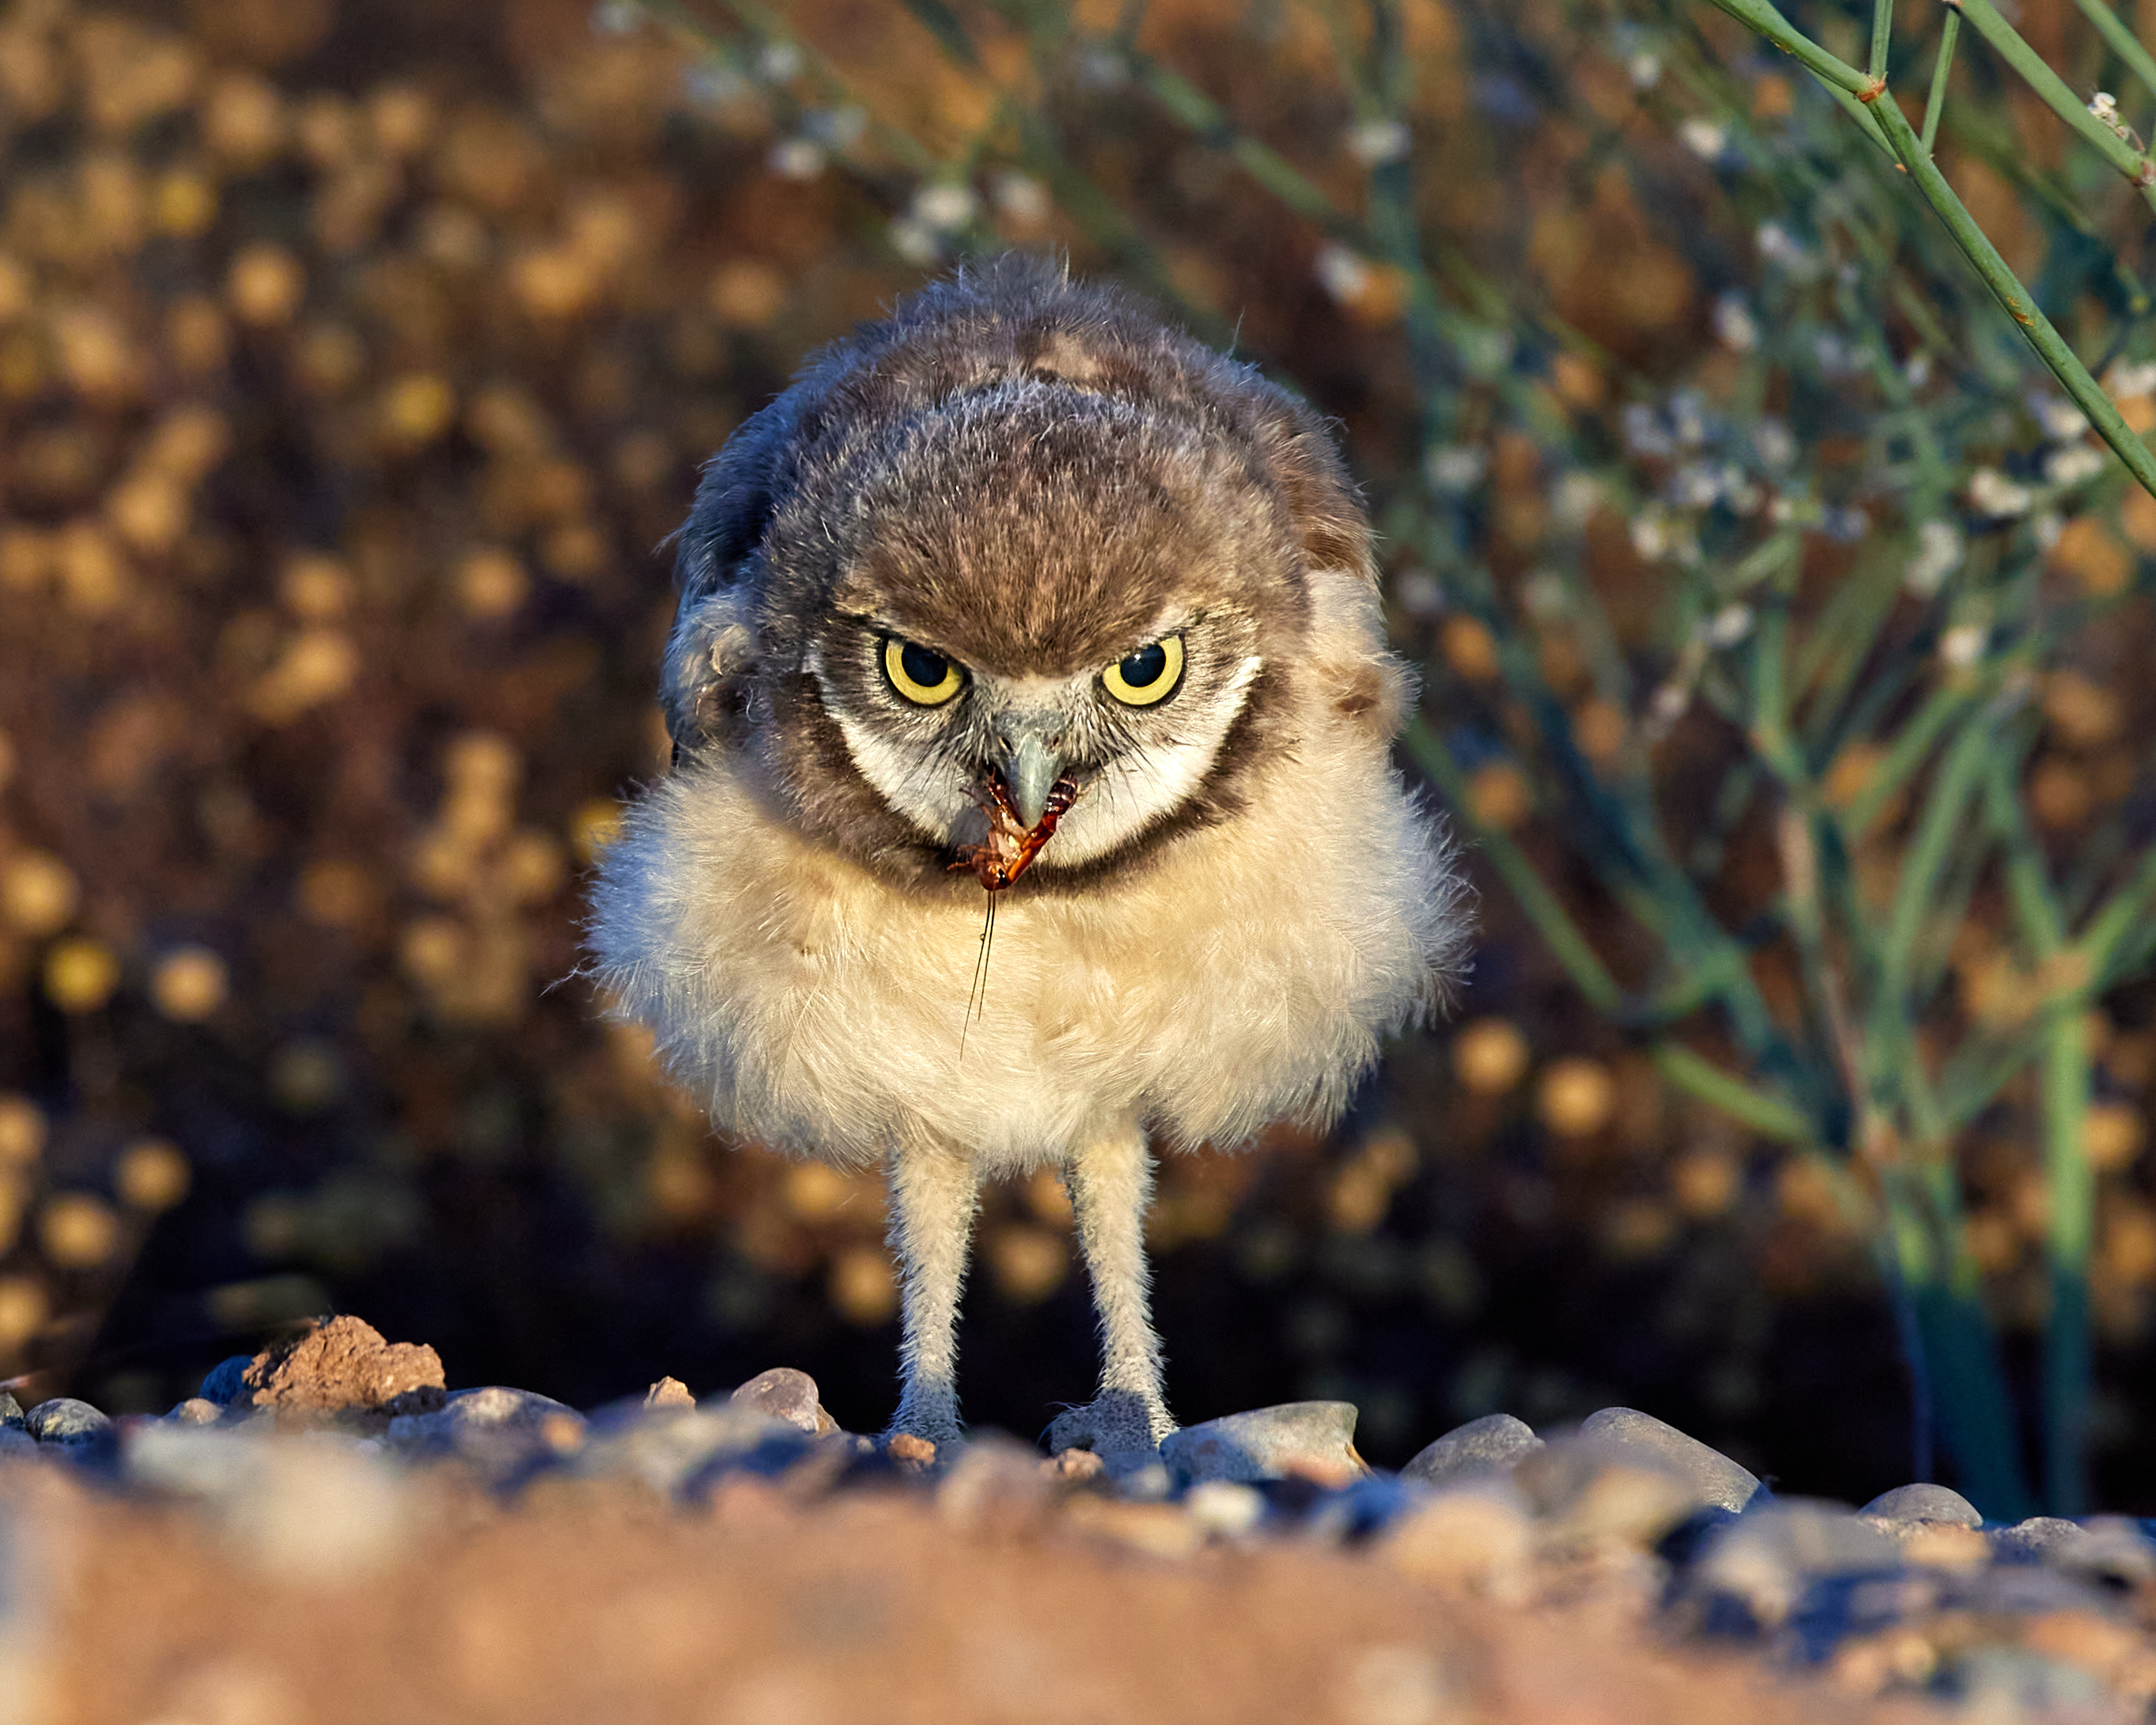 Photo by Tom Mangelsdorf  |  Burrowing Owl owlet with a bug for breakfast